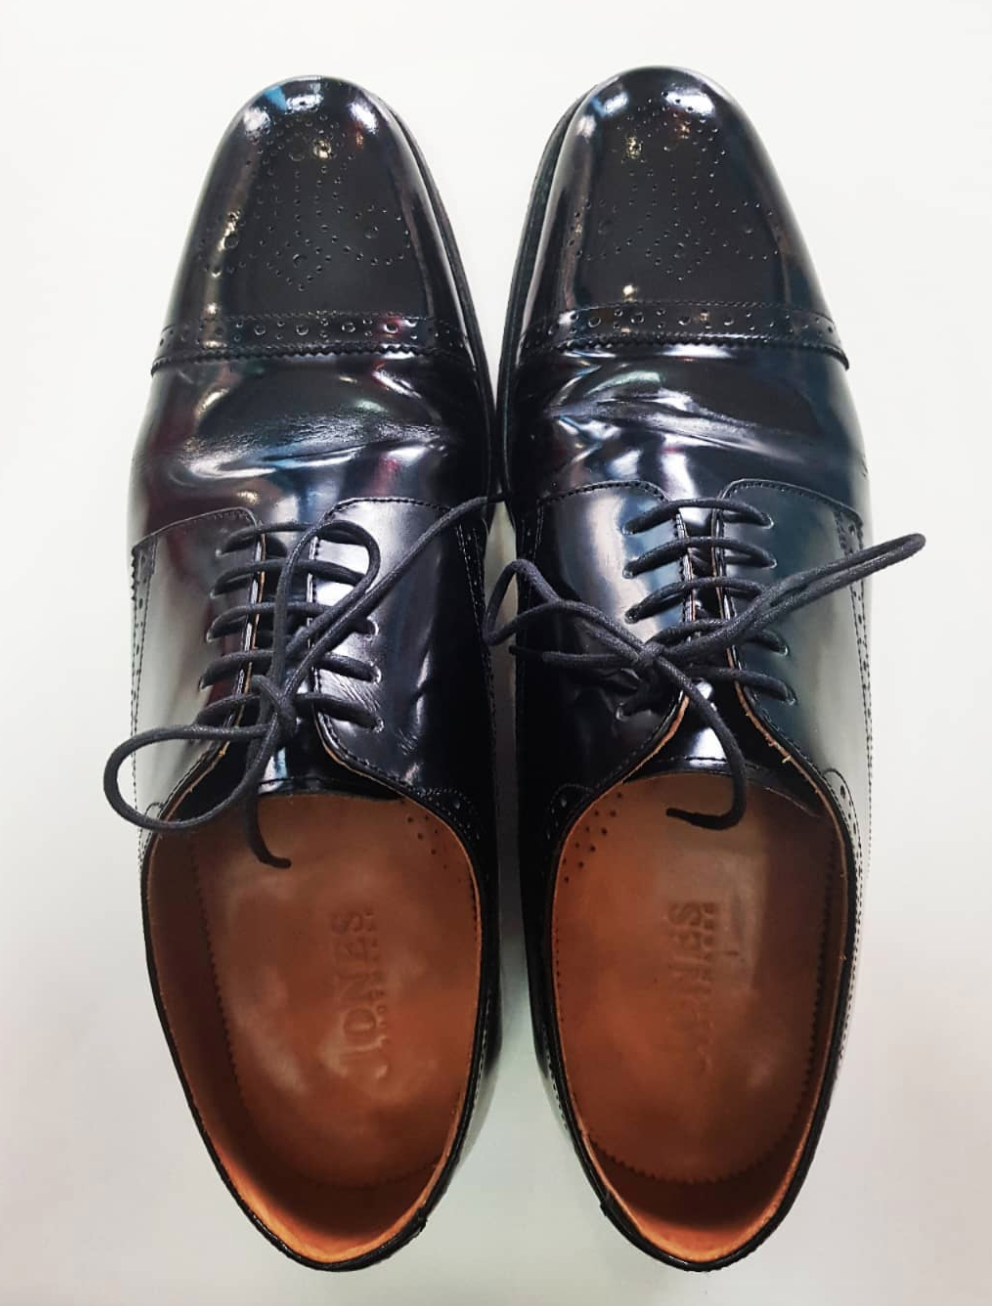 Above: As well as sharing how his has bought a new three piece tweed suit, Austin & Co’s owner Sean Austin’s anticipation for The Retas has also seen him give his posh shoes a revamp.